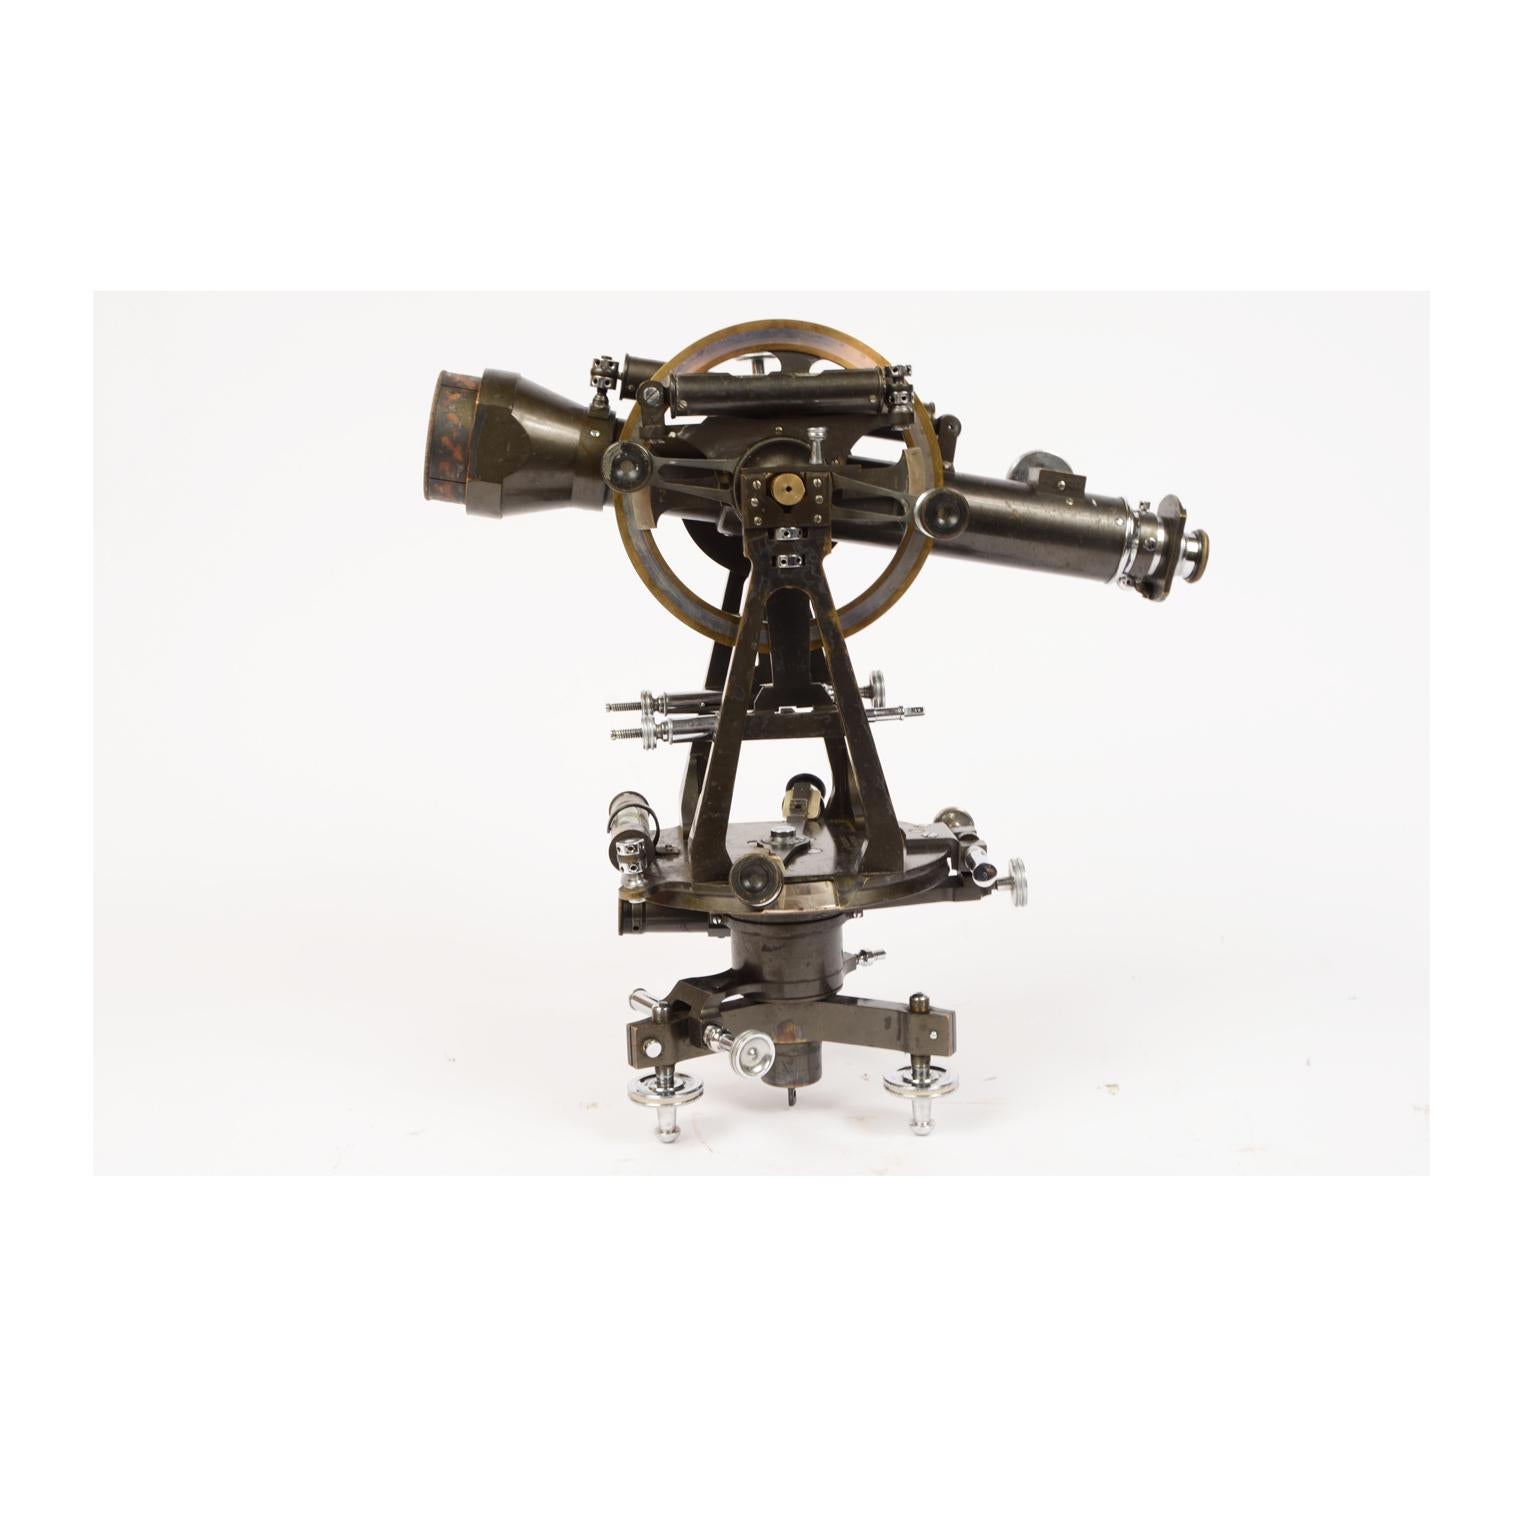 Salmoiraghi Antique Brass Tacheometer, Surveying Measuring Instrument, 1860  In Good Condition For Sale In Milan, IT